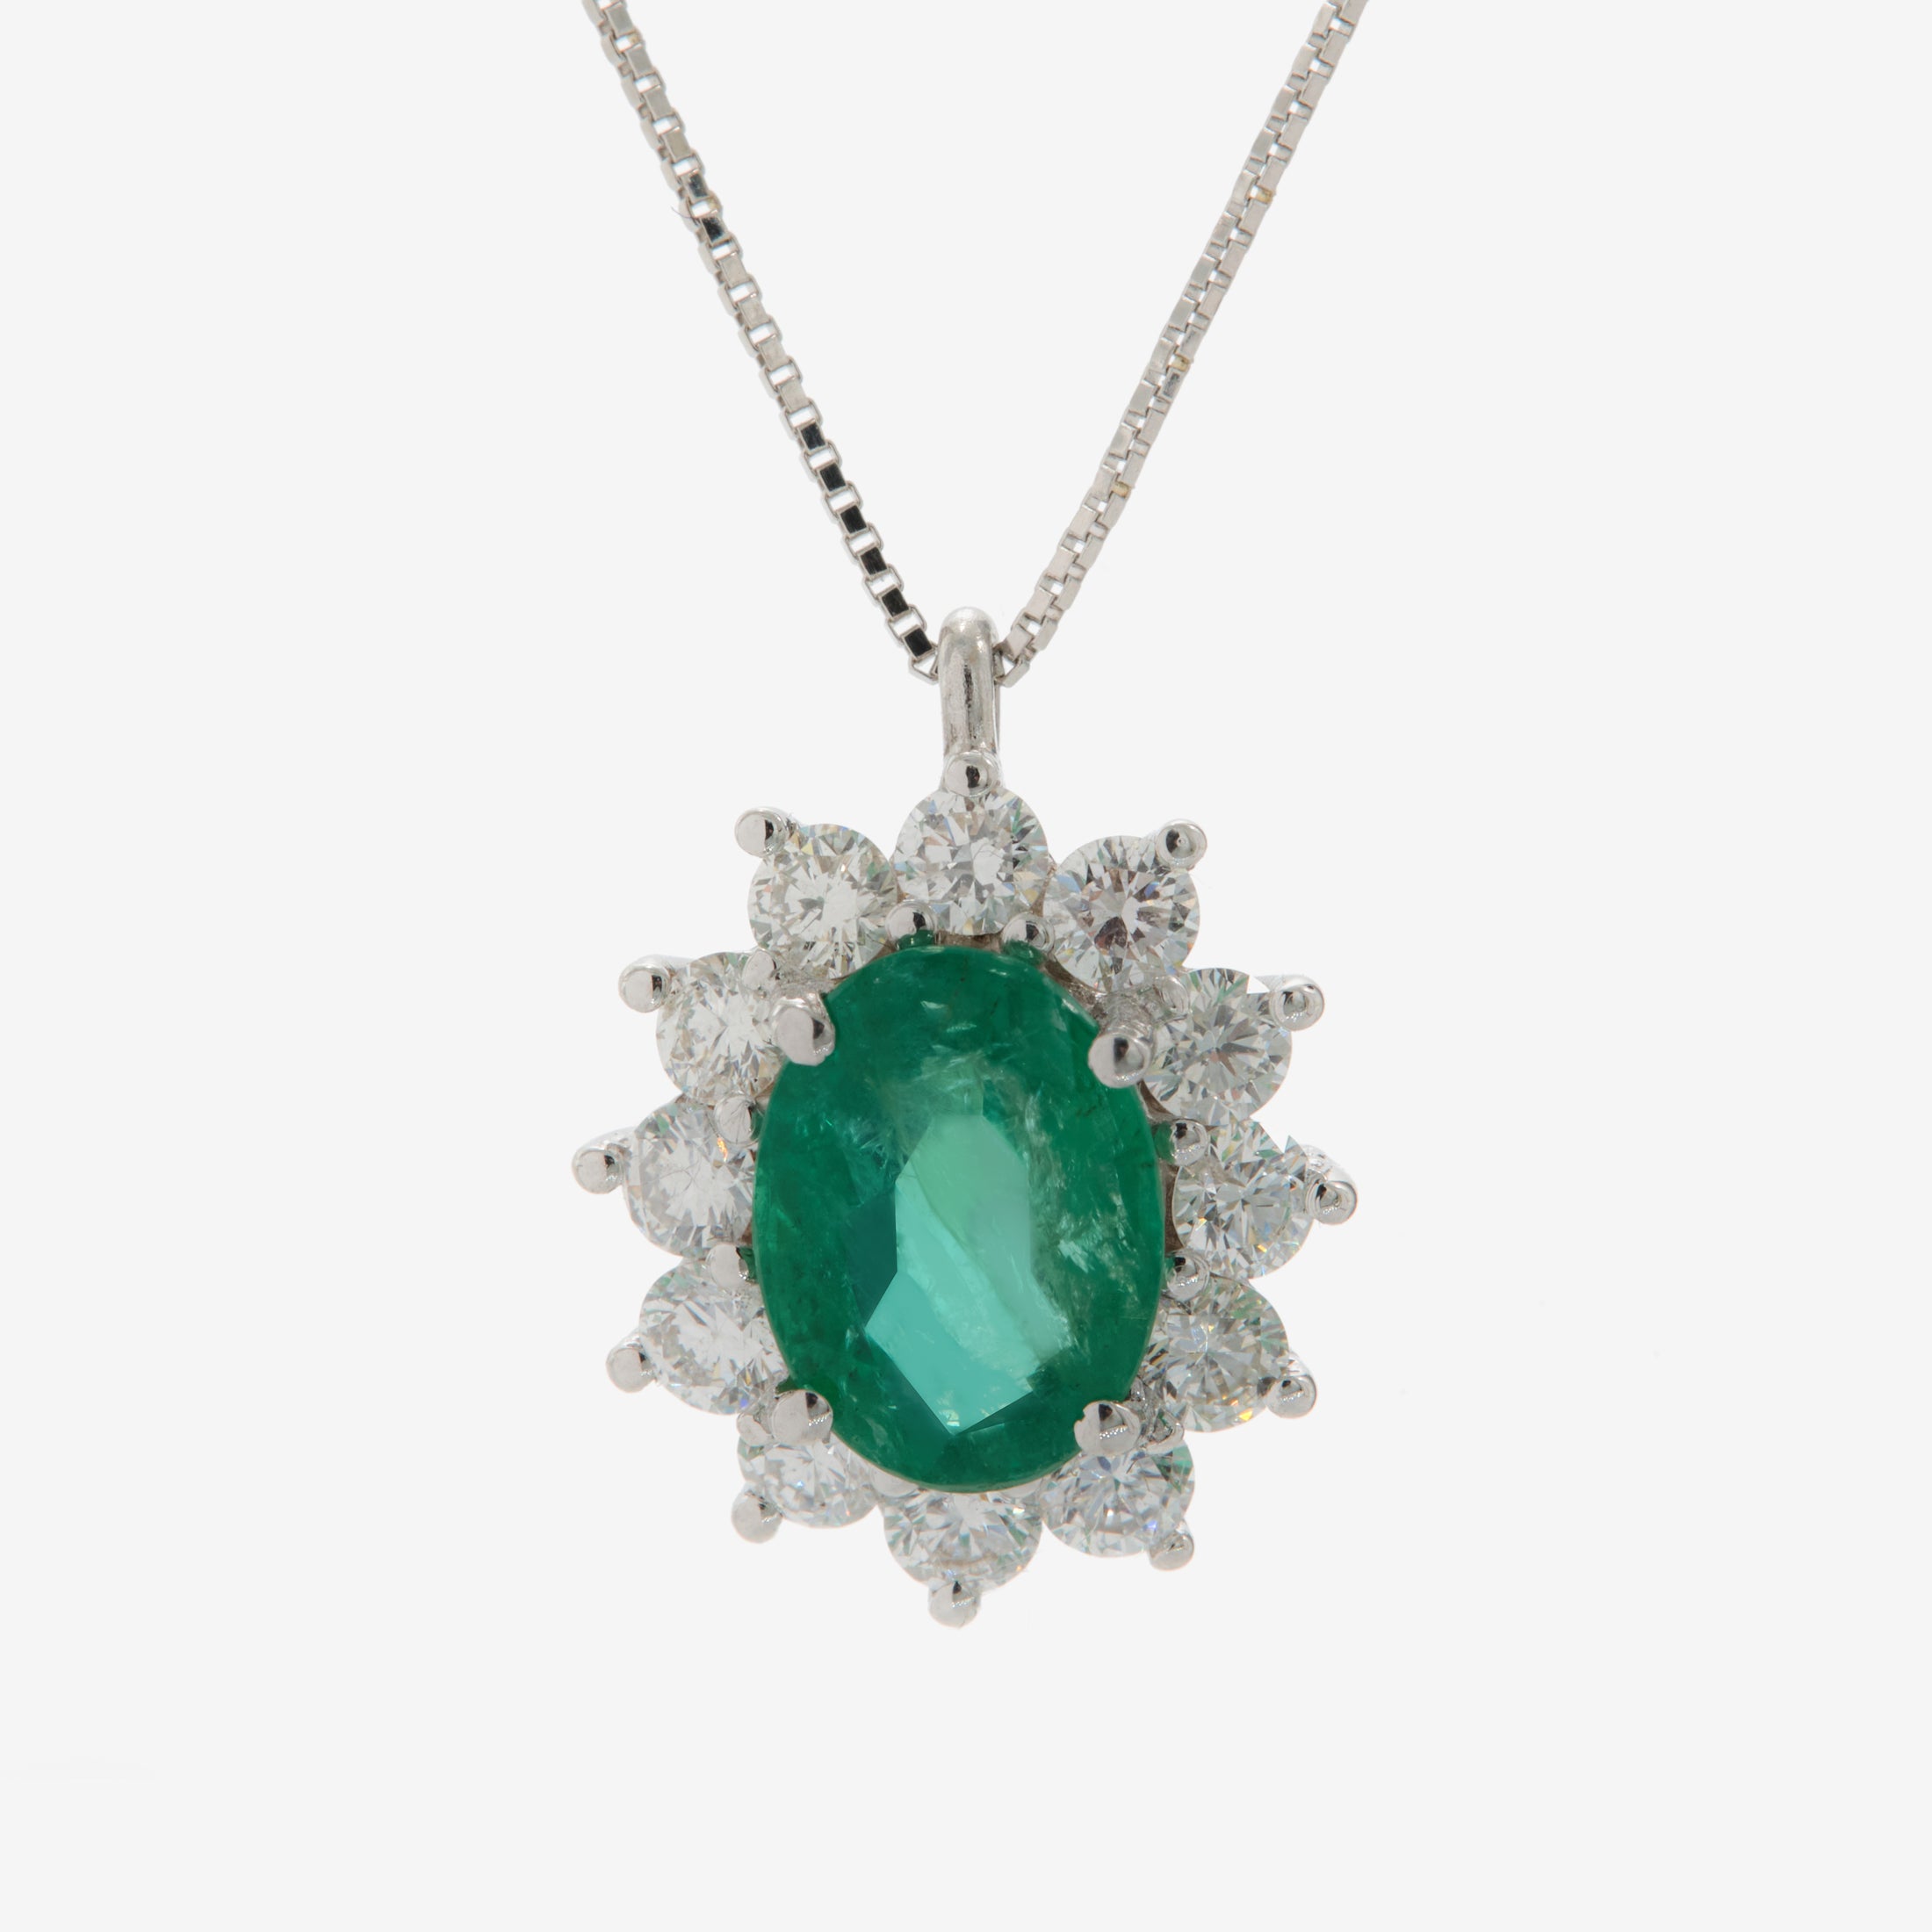 Huna necklace with emerald and diamonds